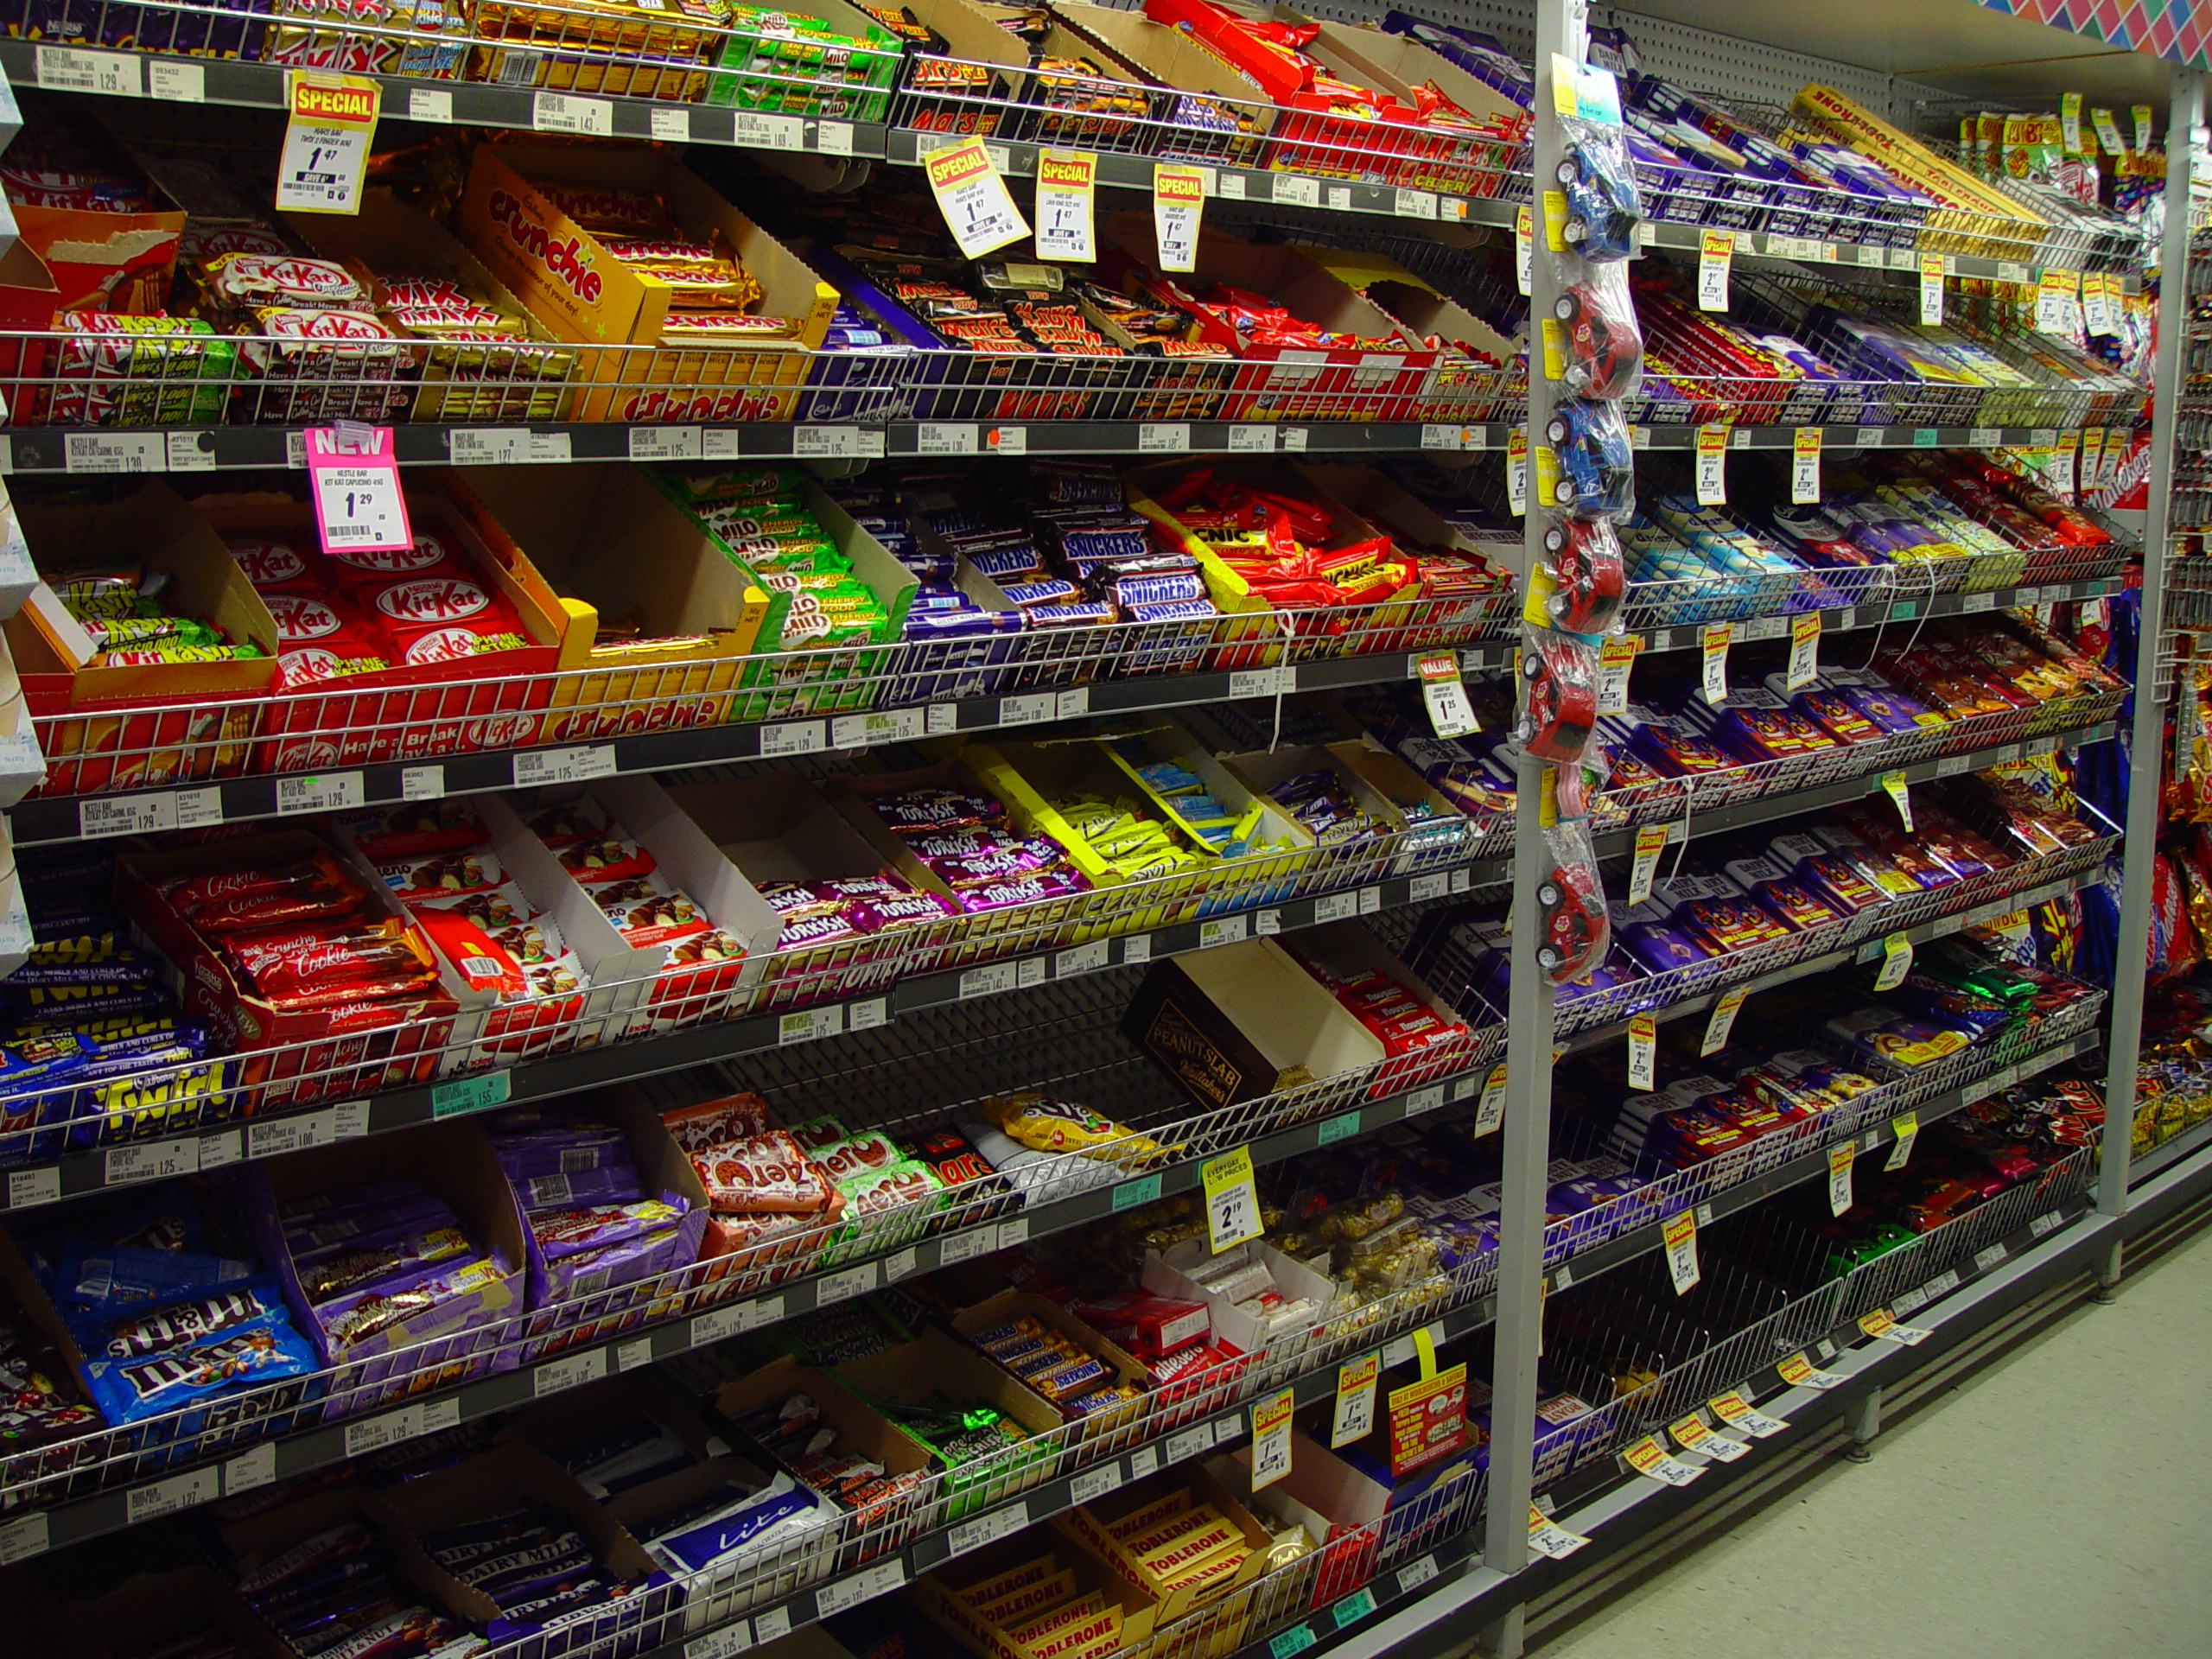 shop, chocolate, food, candy bar, candy, colorful, colors, shelf, sweets